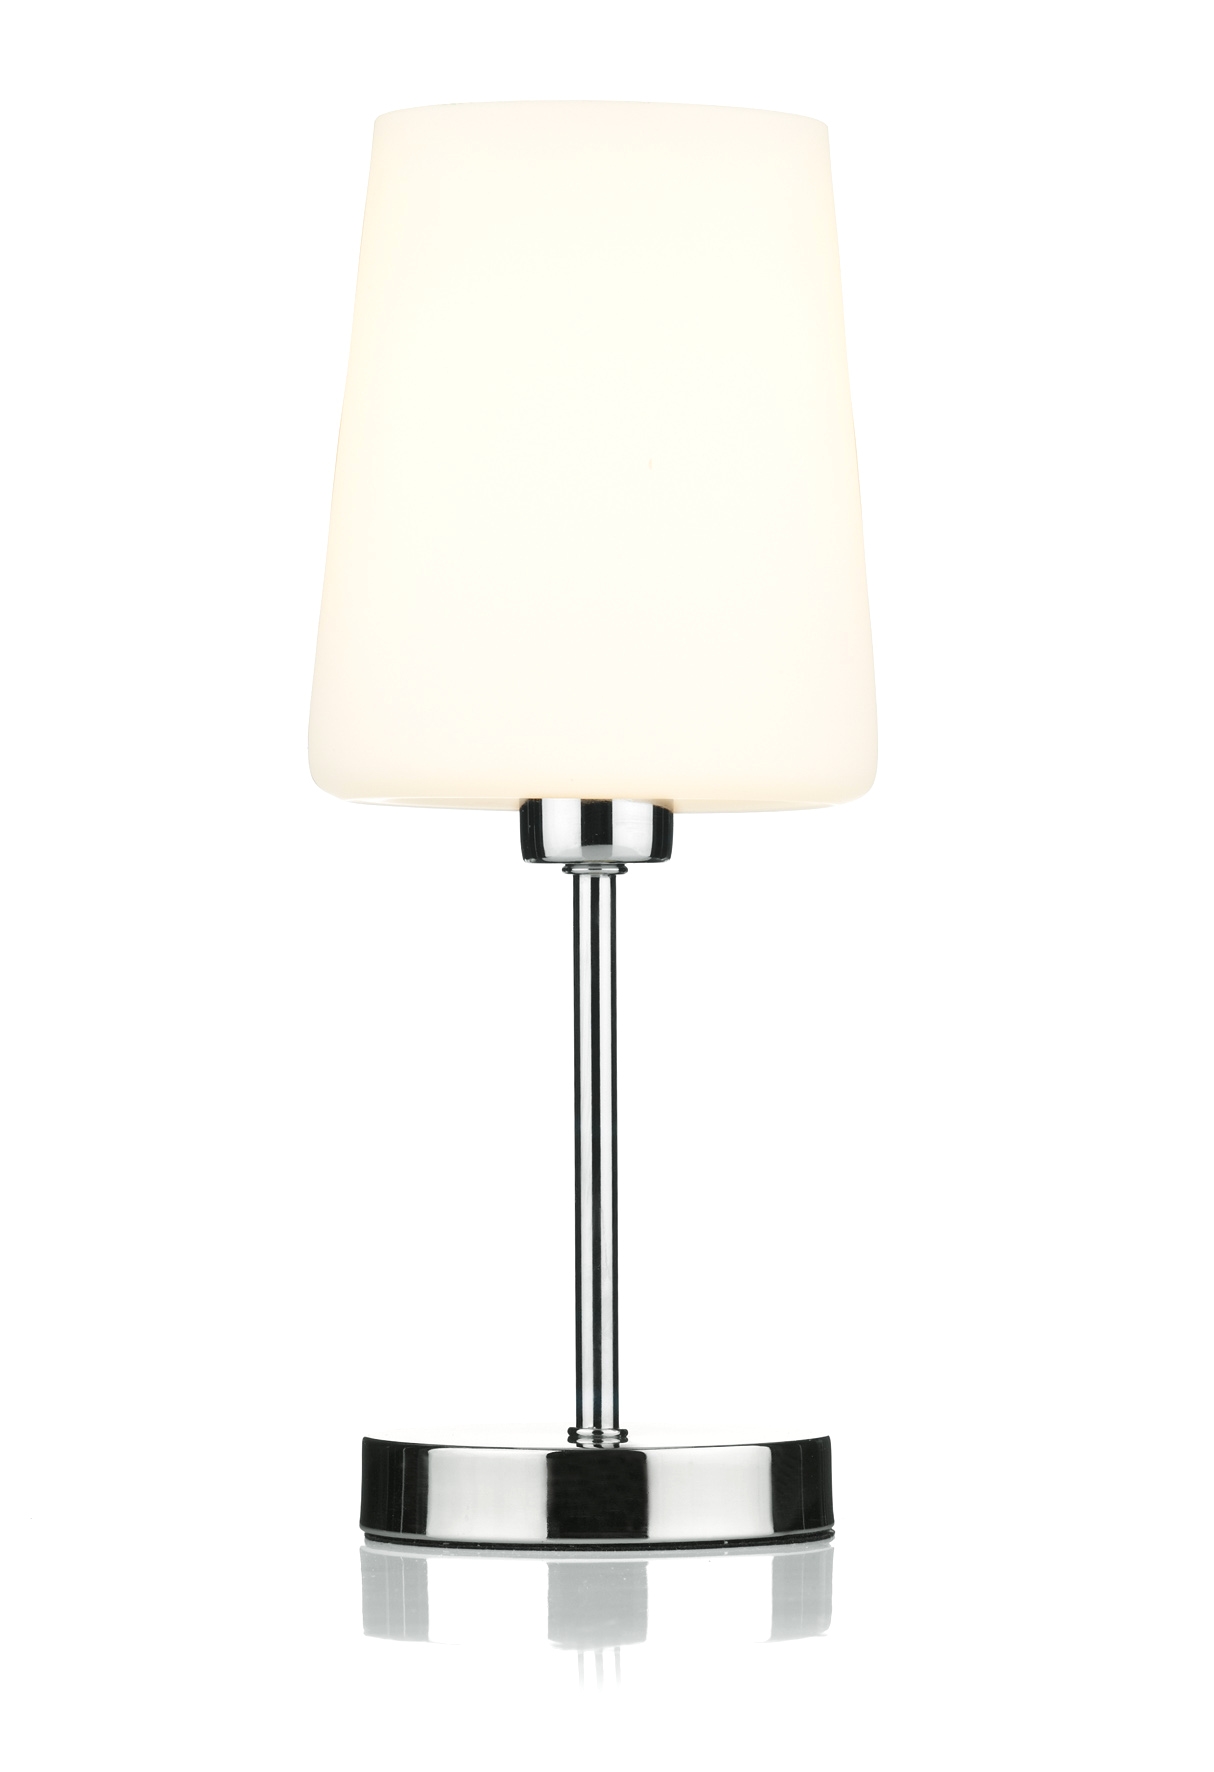 small desk fan argos lovely touch table lamps argos small bedside brown uk remarkable tar